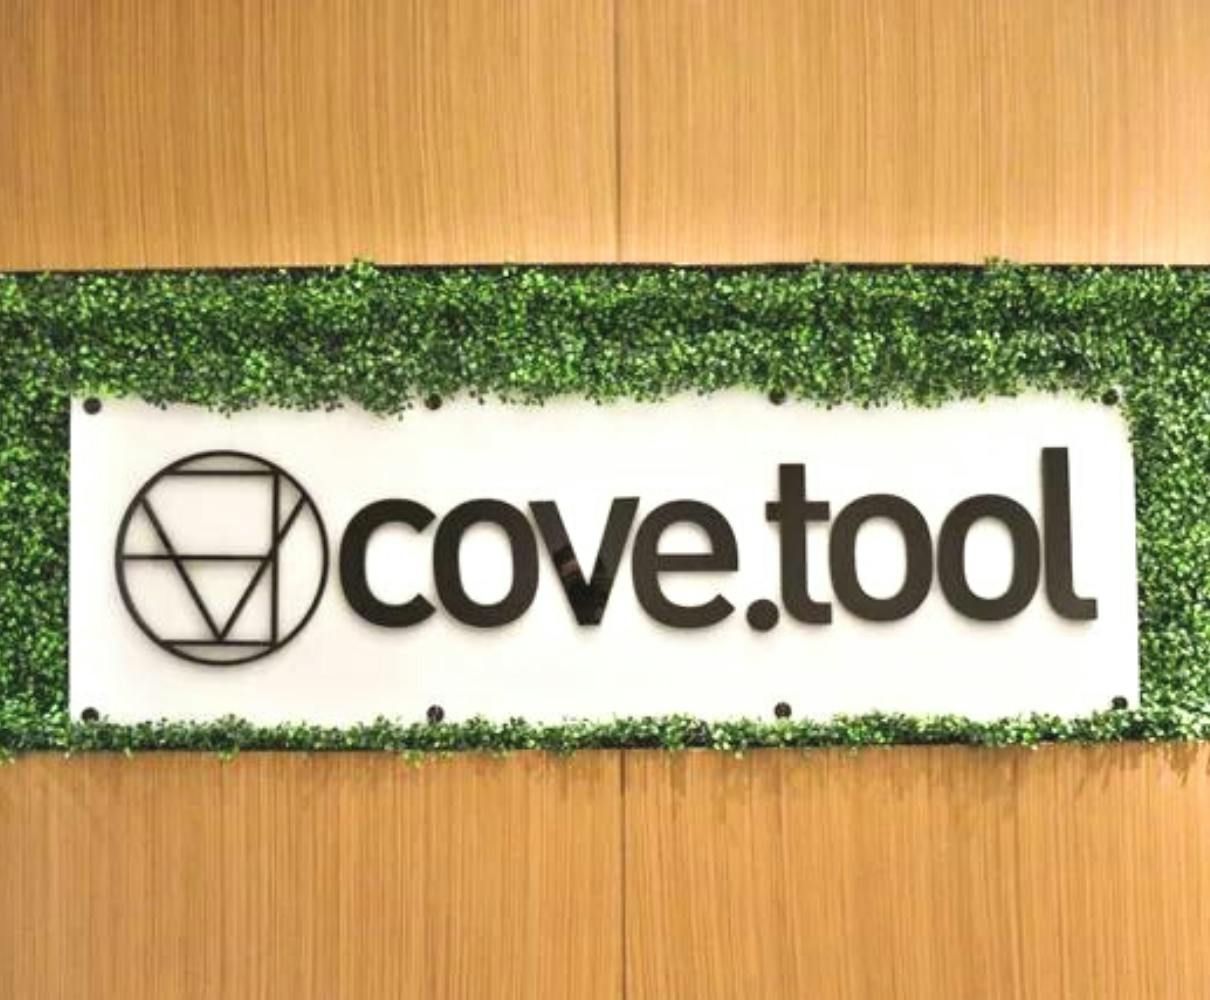 cove.tool sign in office